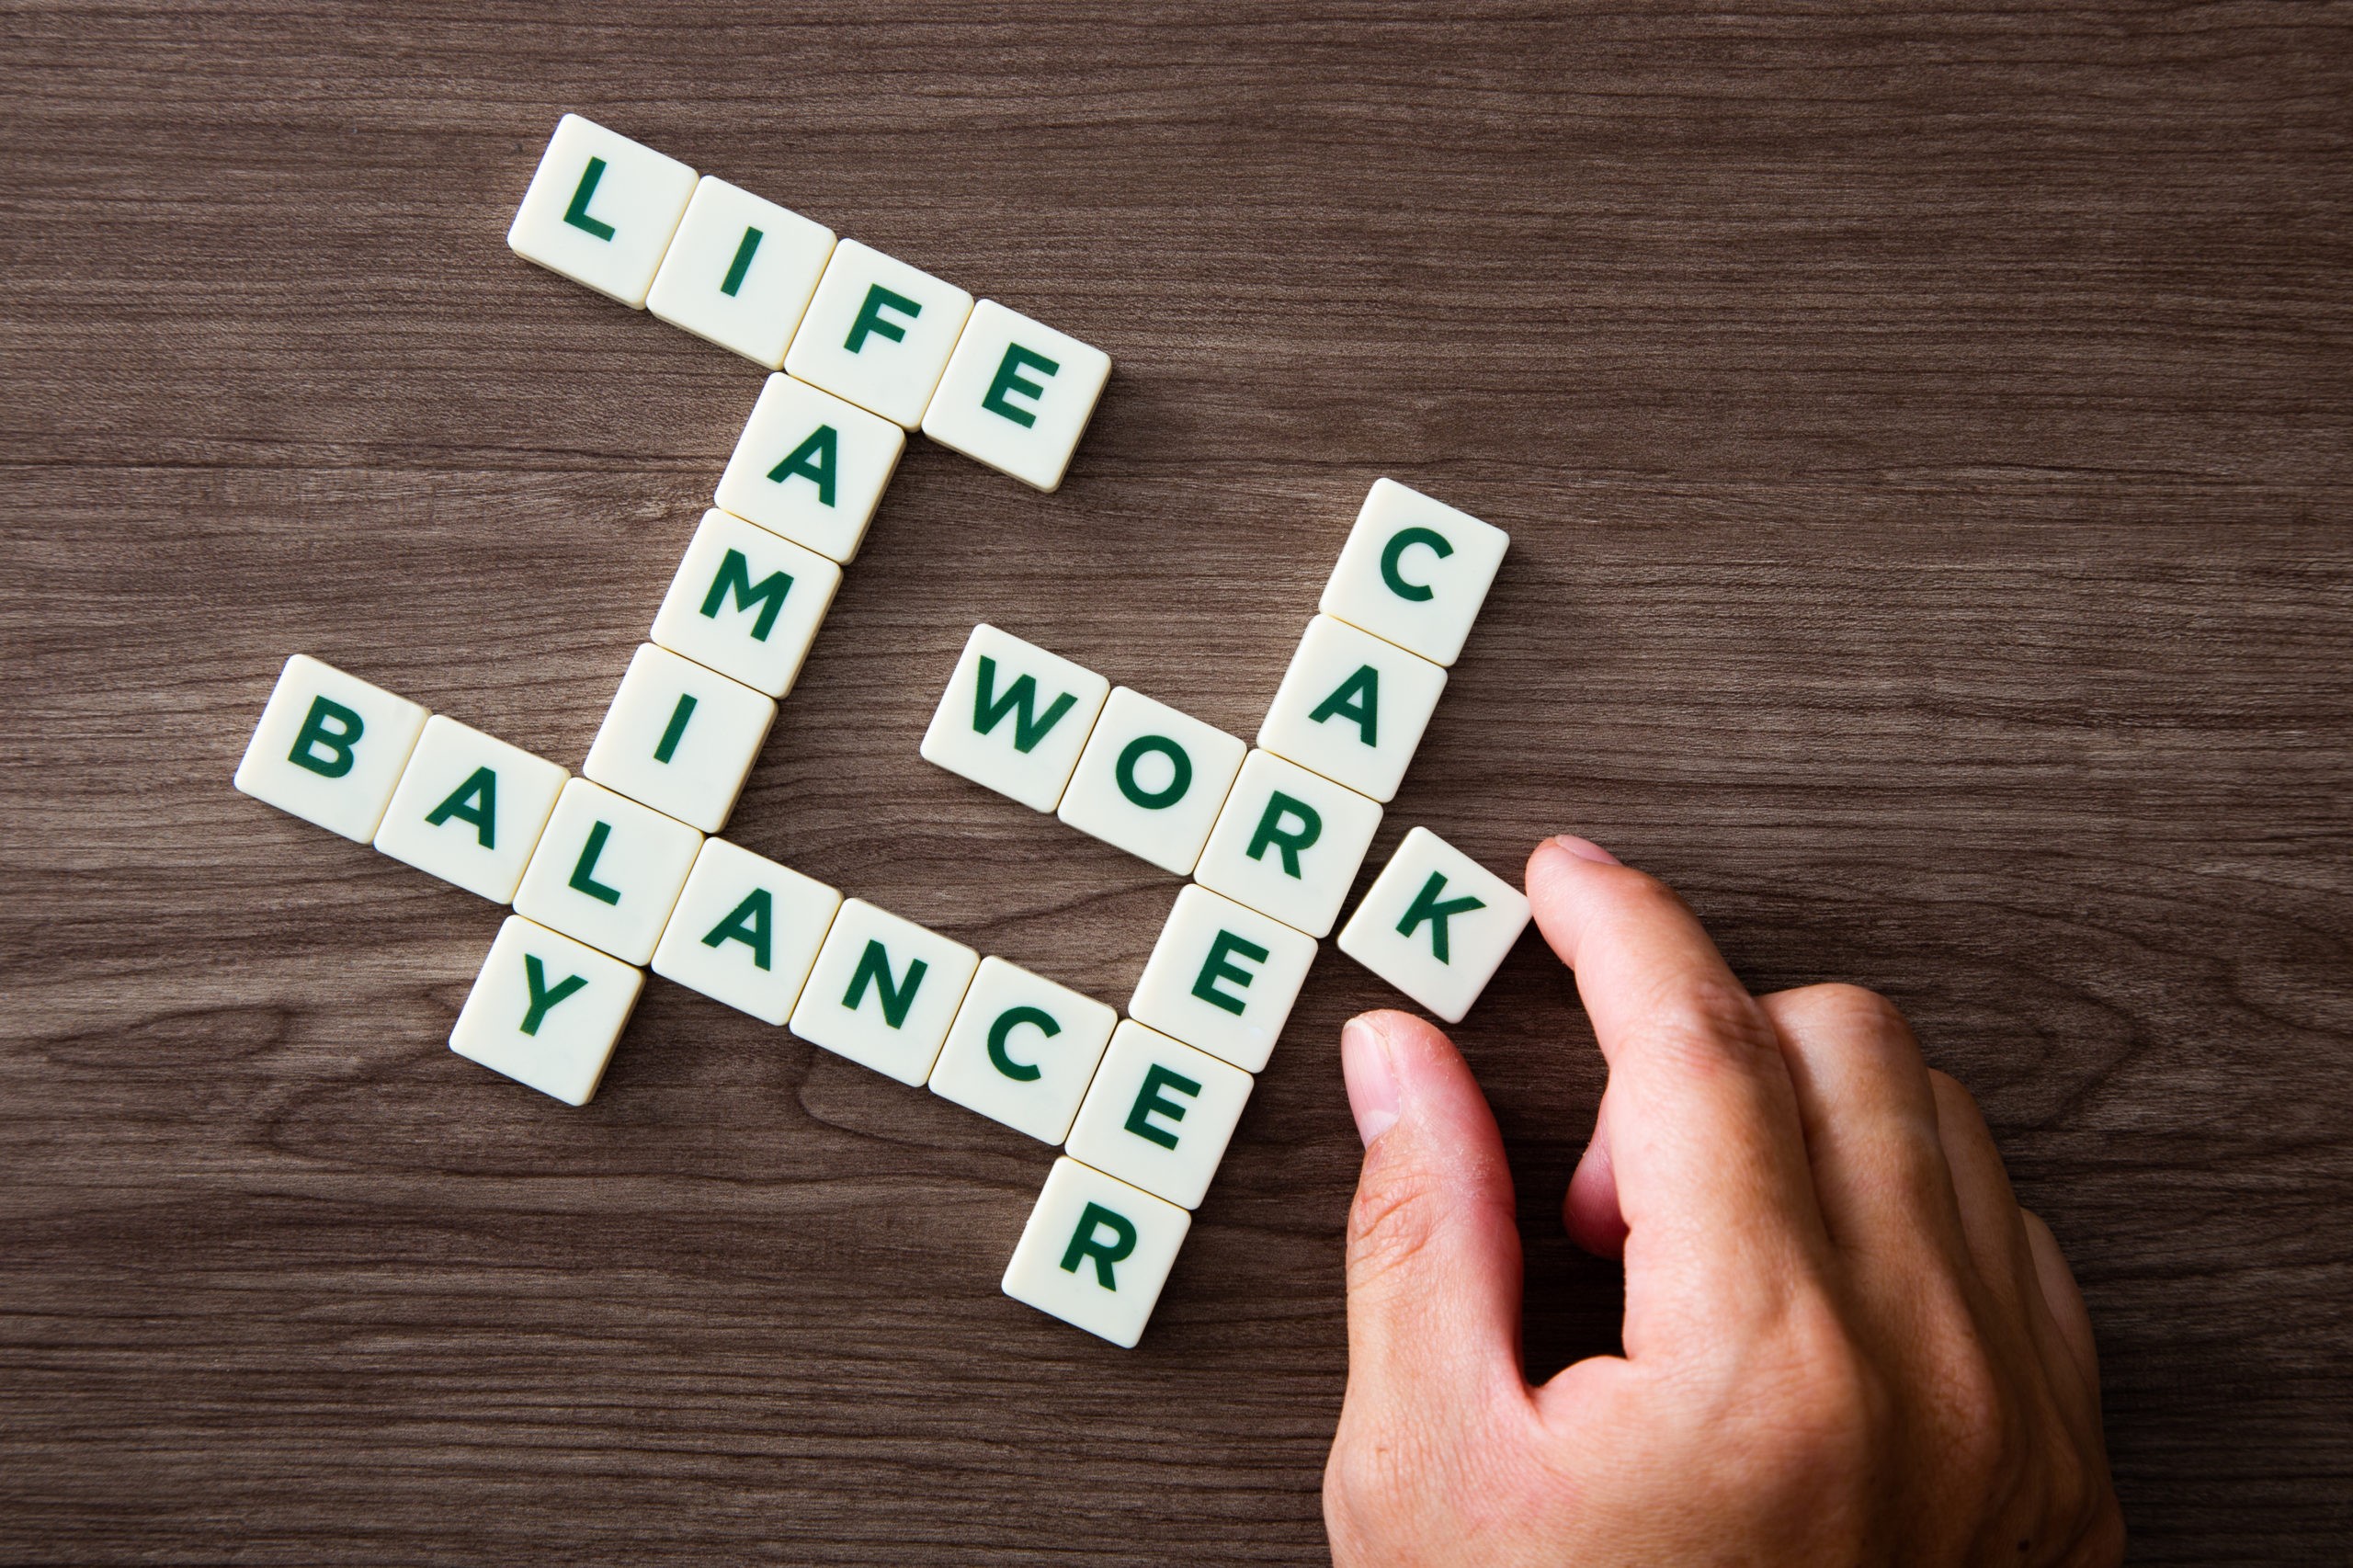 Crossword of concept of harmony and balance between work and family